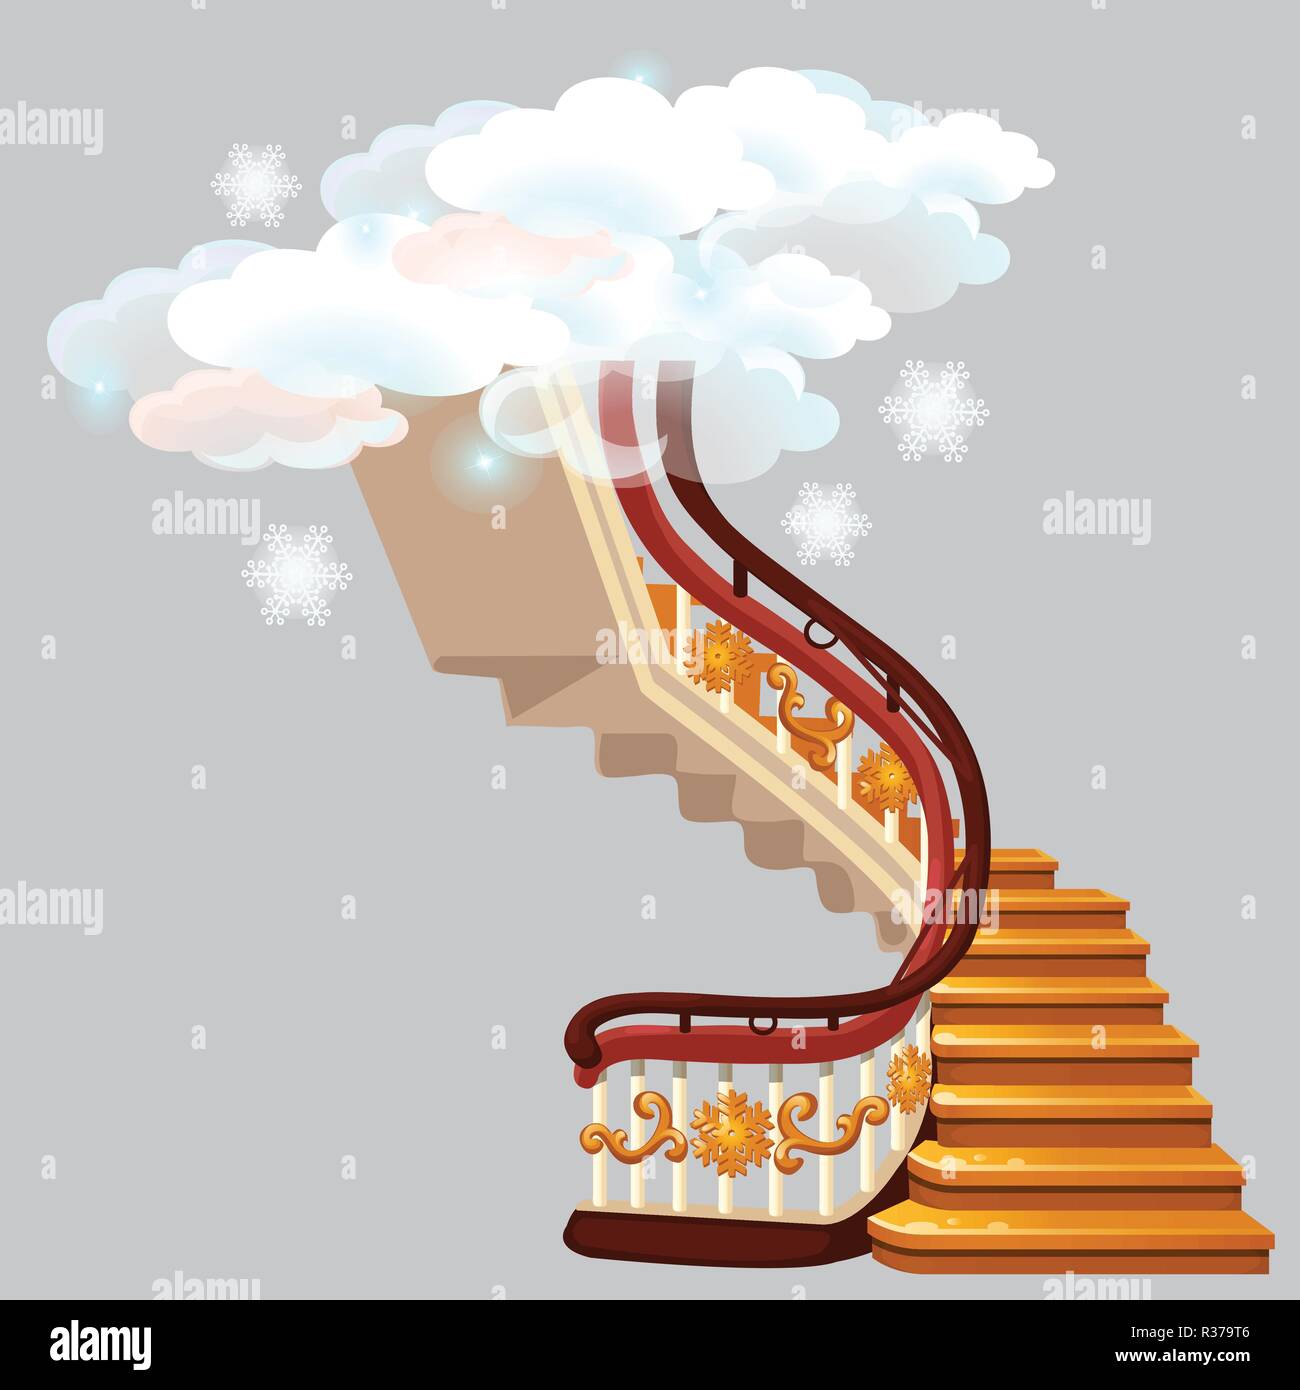 The golden stairs leading into the snow clouds with snowflakes isolated on gray background. Sketch for greeting card, festive poster or party invitations. Vector cartoon close-up illustration. Stock Vector